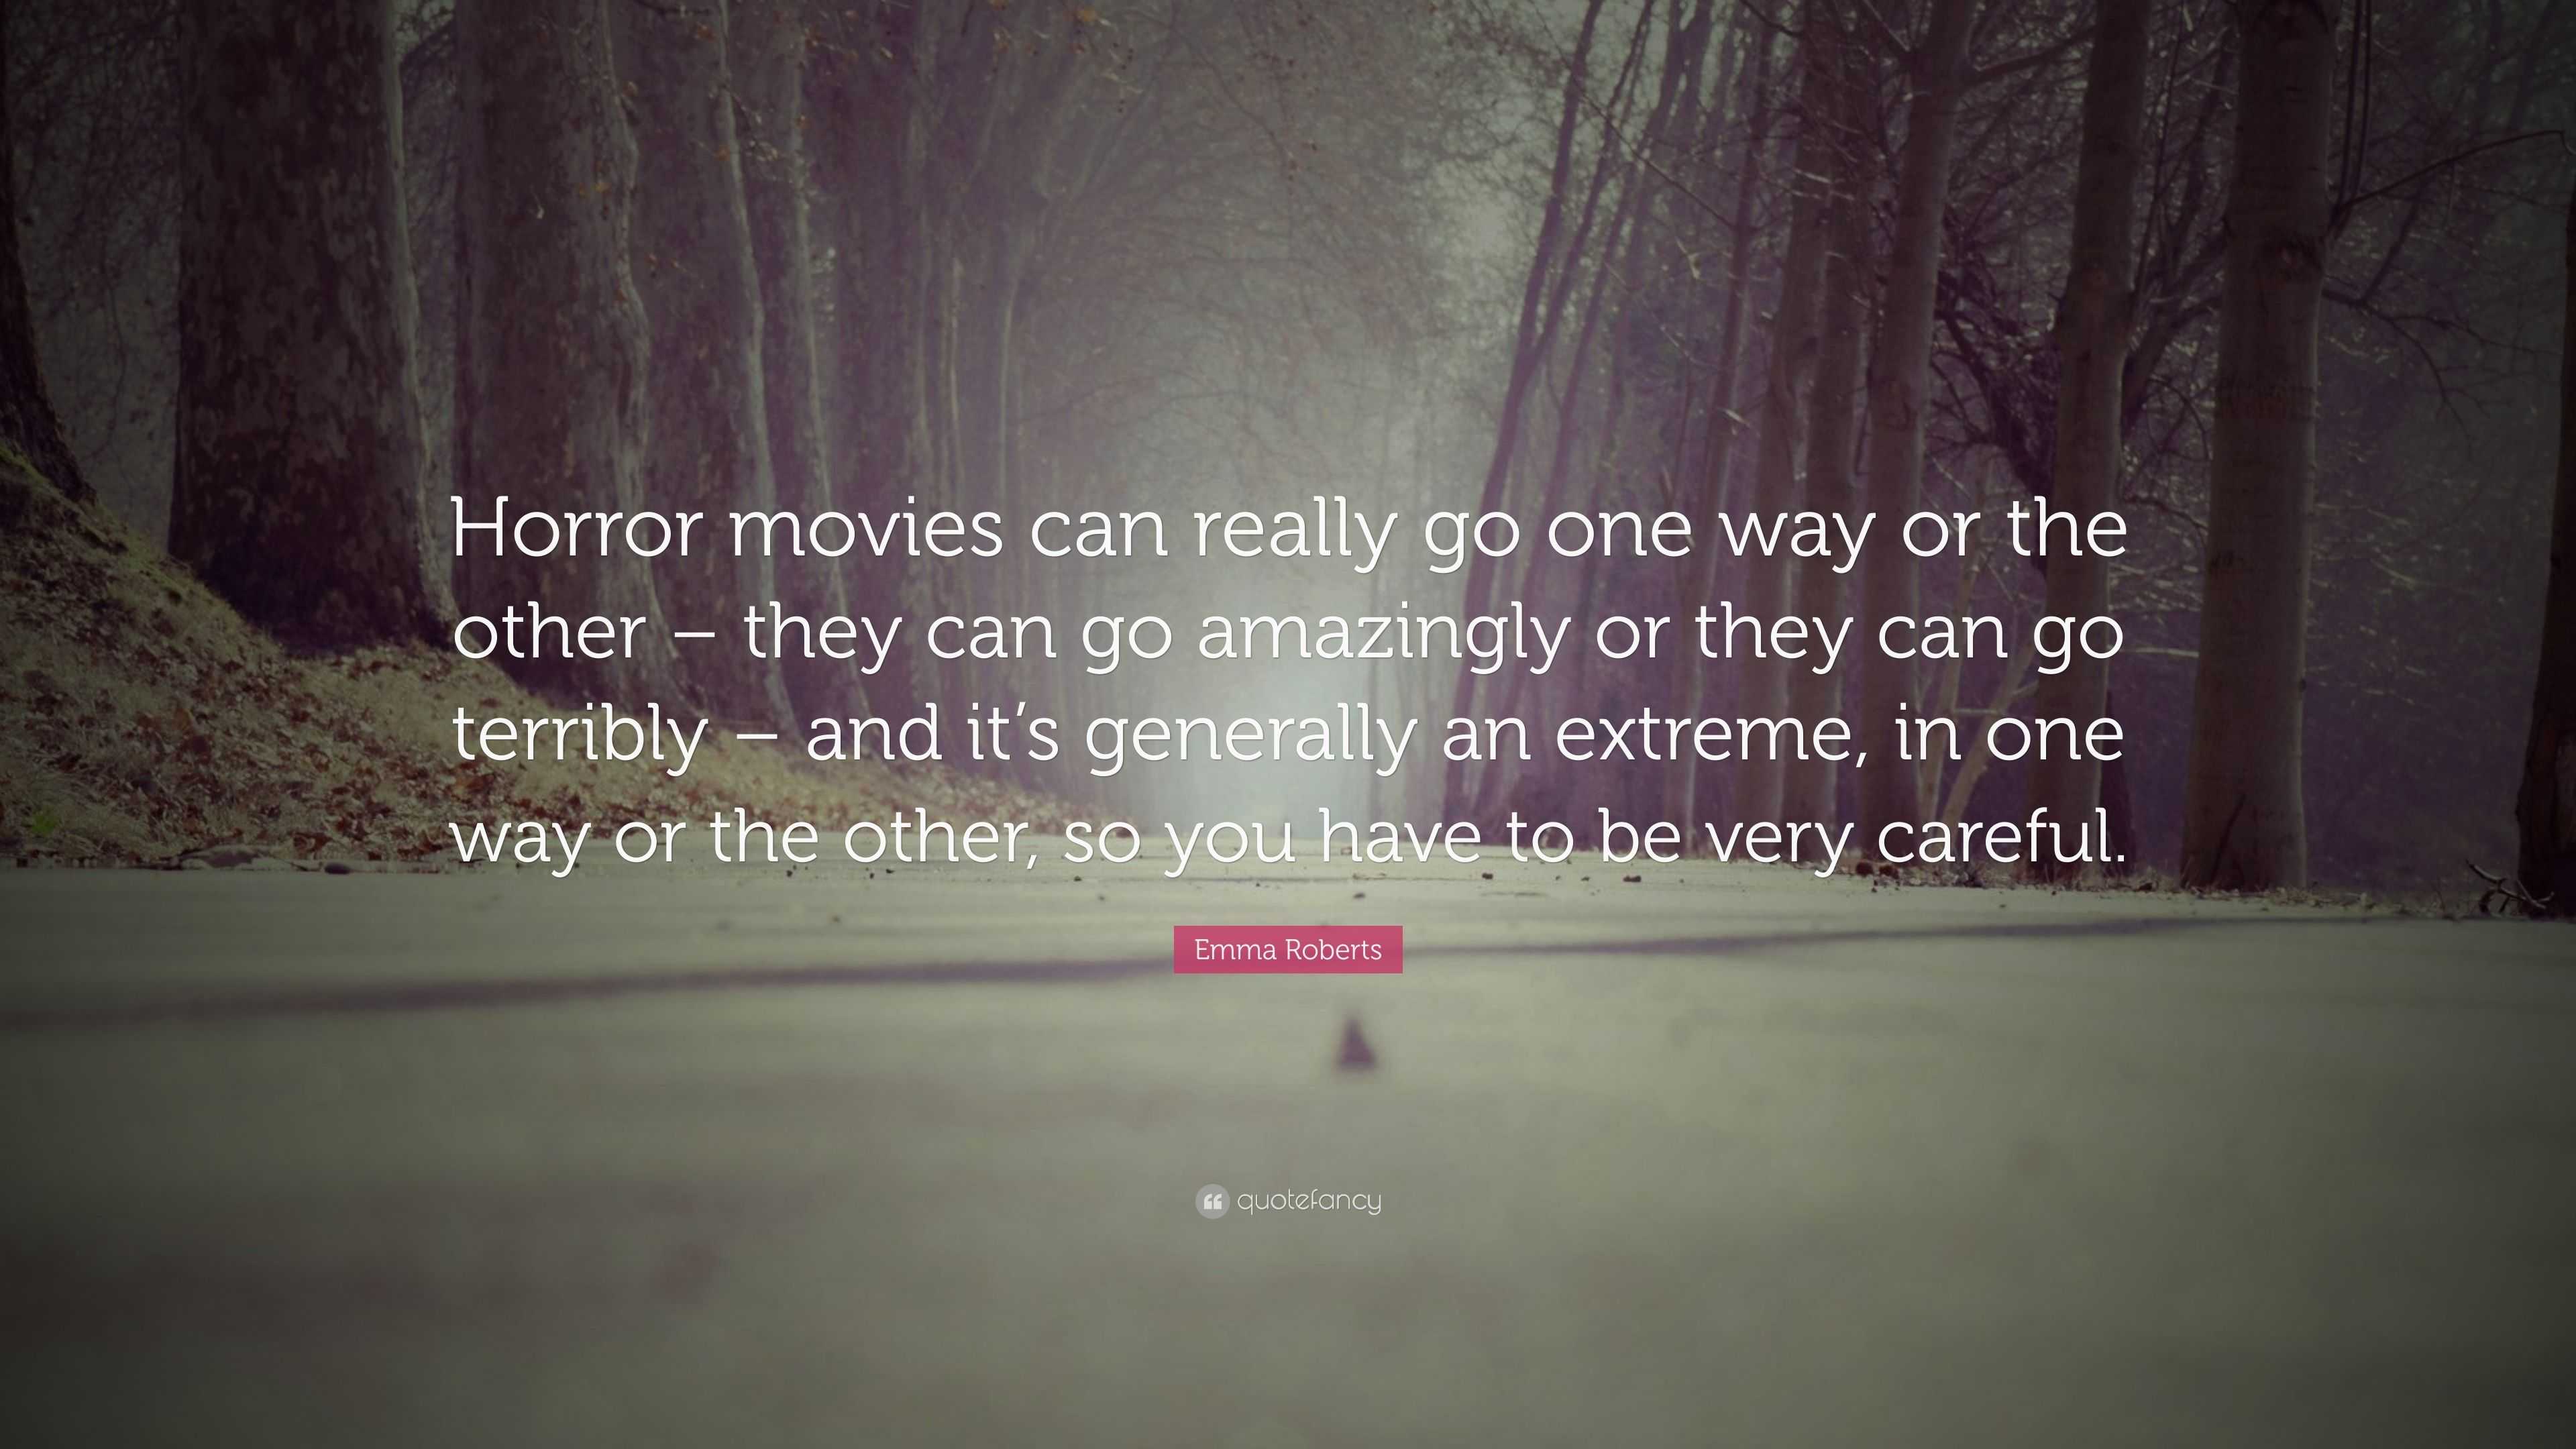 Horror is the Way